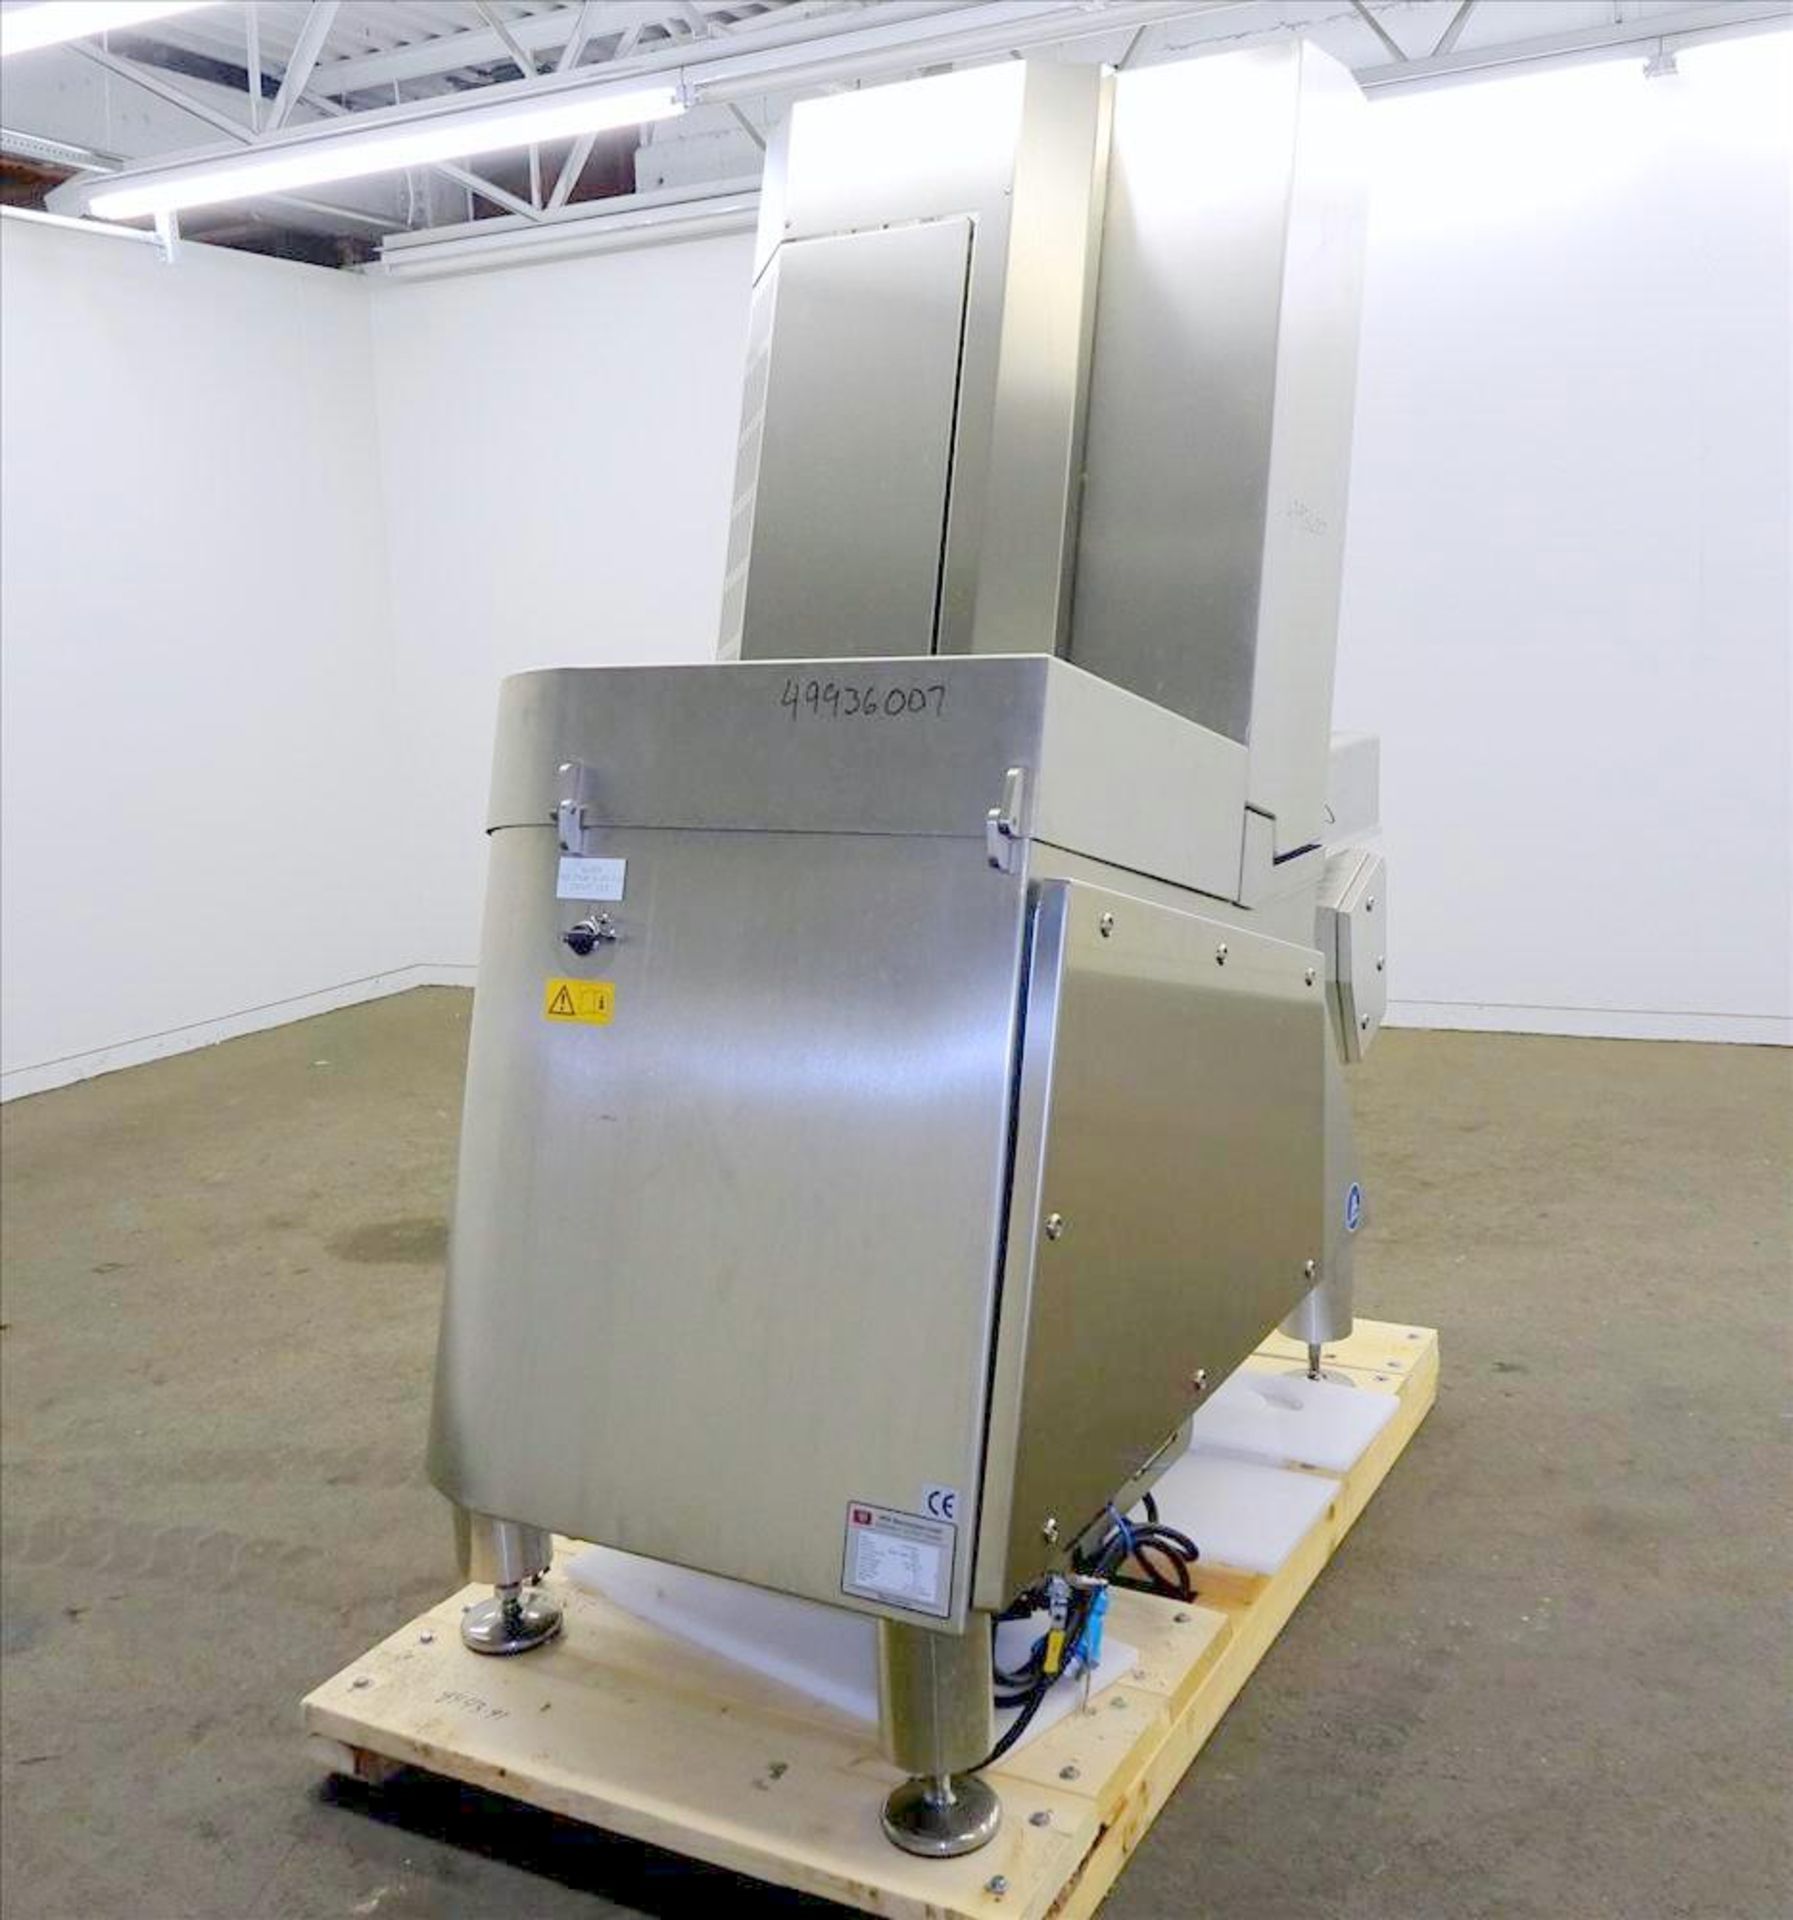 Treif Slicer, Model Divider 660+. 320 x 130 mm / 280 x 160 mm infeed chamber. Serial # 660000 - Image 4 of 16